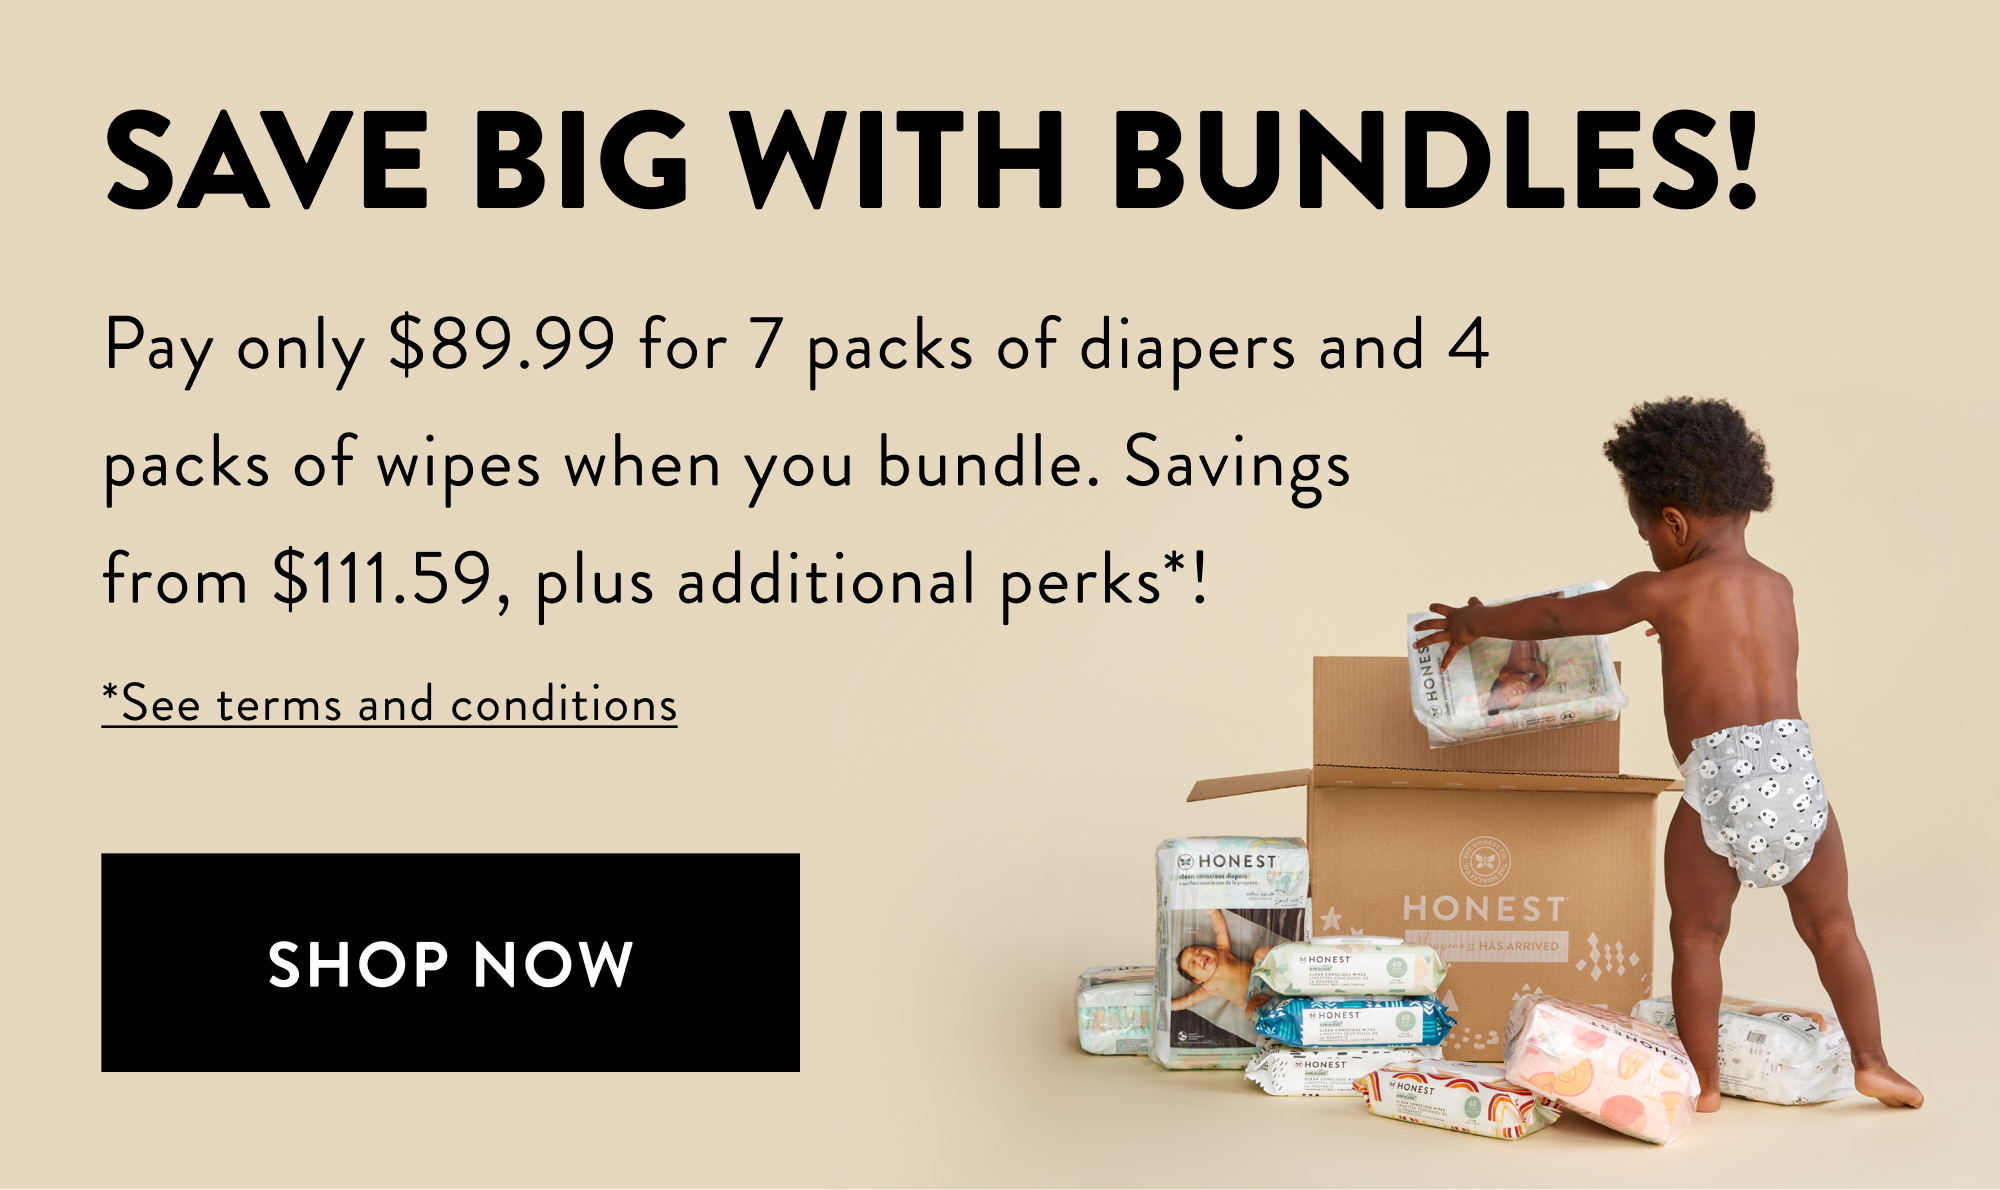 Save Big with Bundles - Pay only $89.99 for 7 packs of diapers and 4 packs of wipes when you bundle. Savings from $111.59, plus additional perks*! Shop now